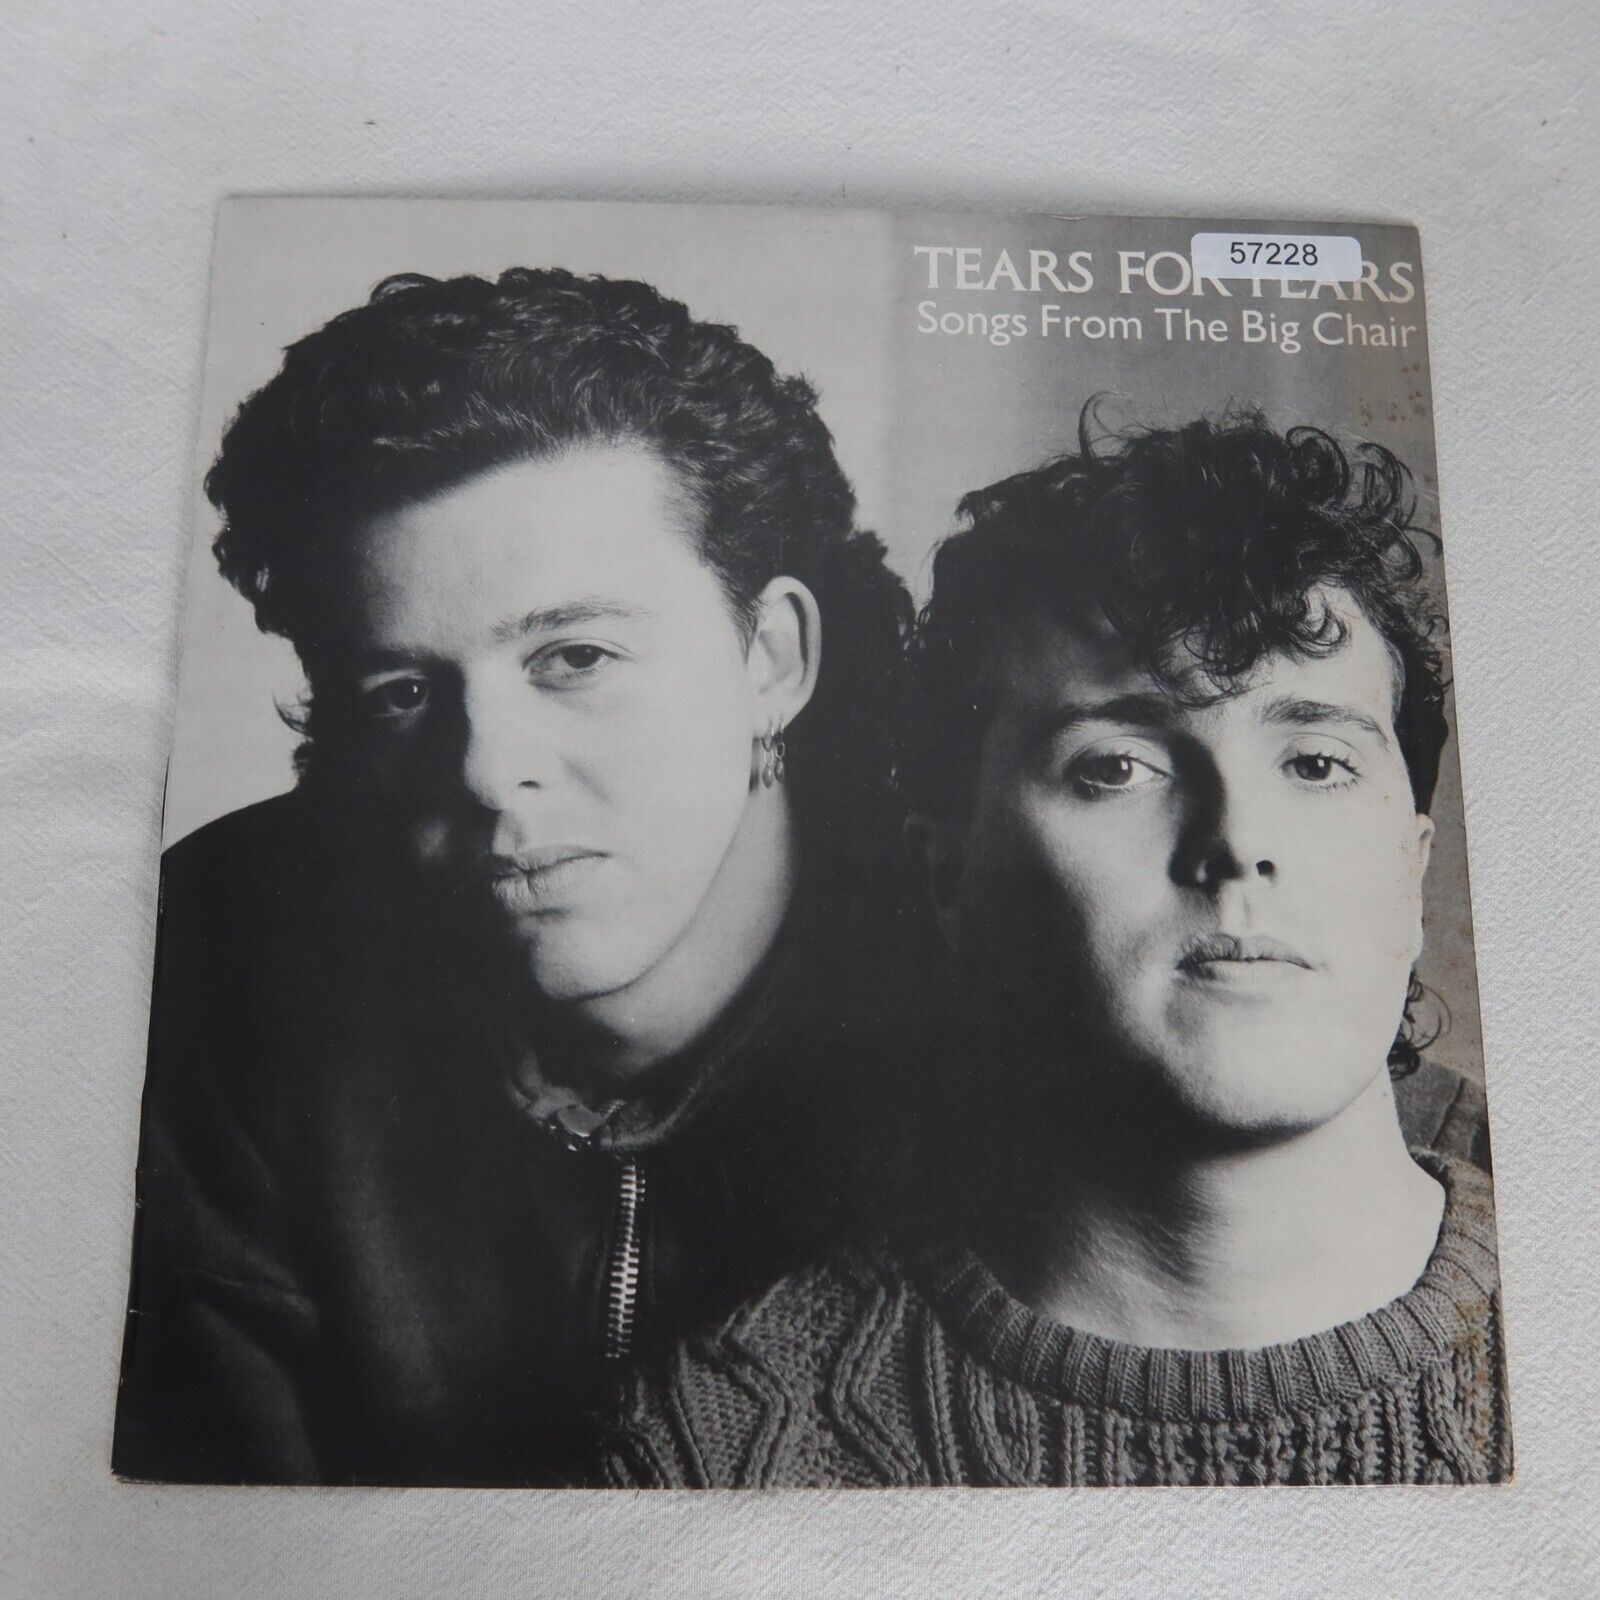 Tears For Fears Songs From The Big Chair LP Vinyl Record Album